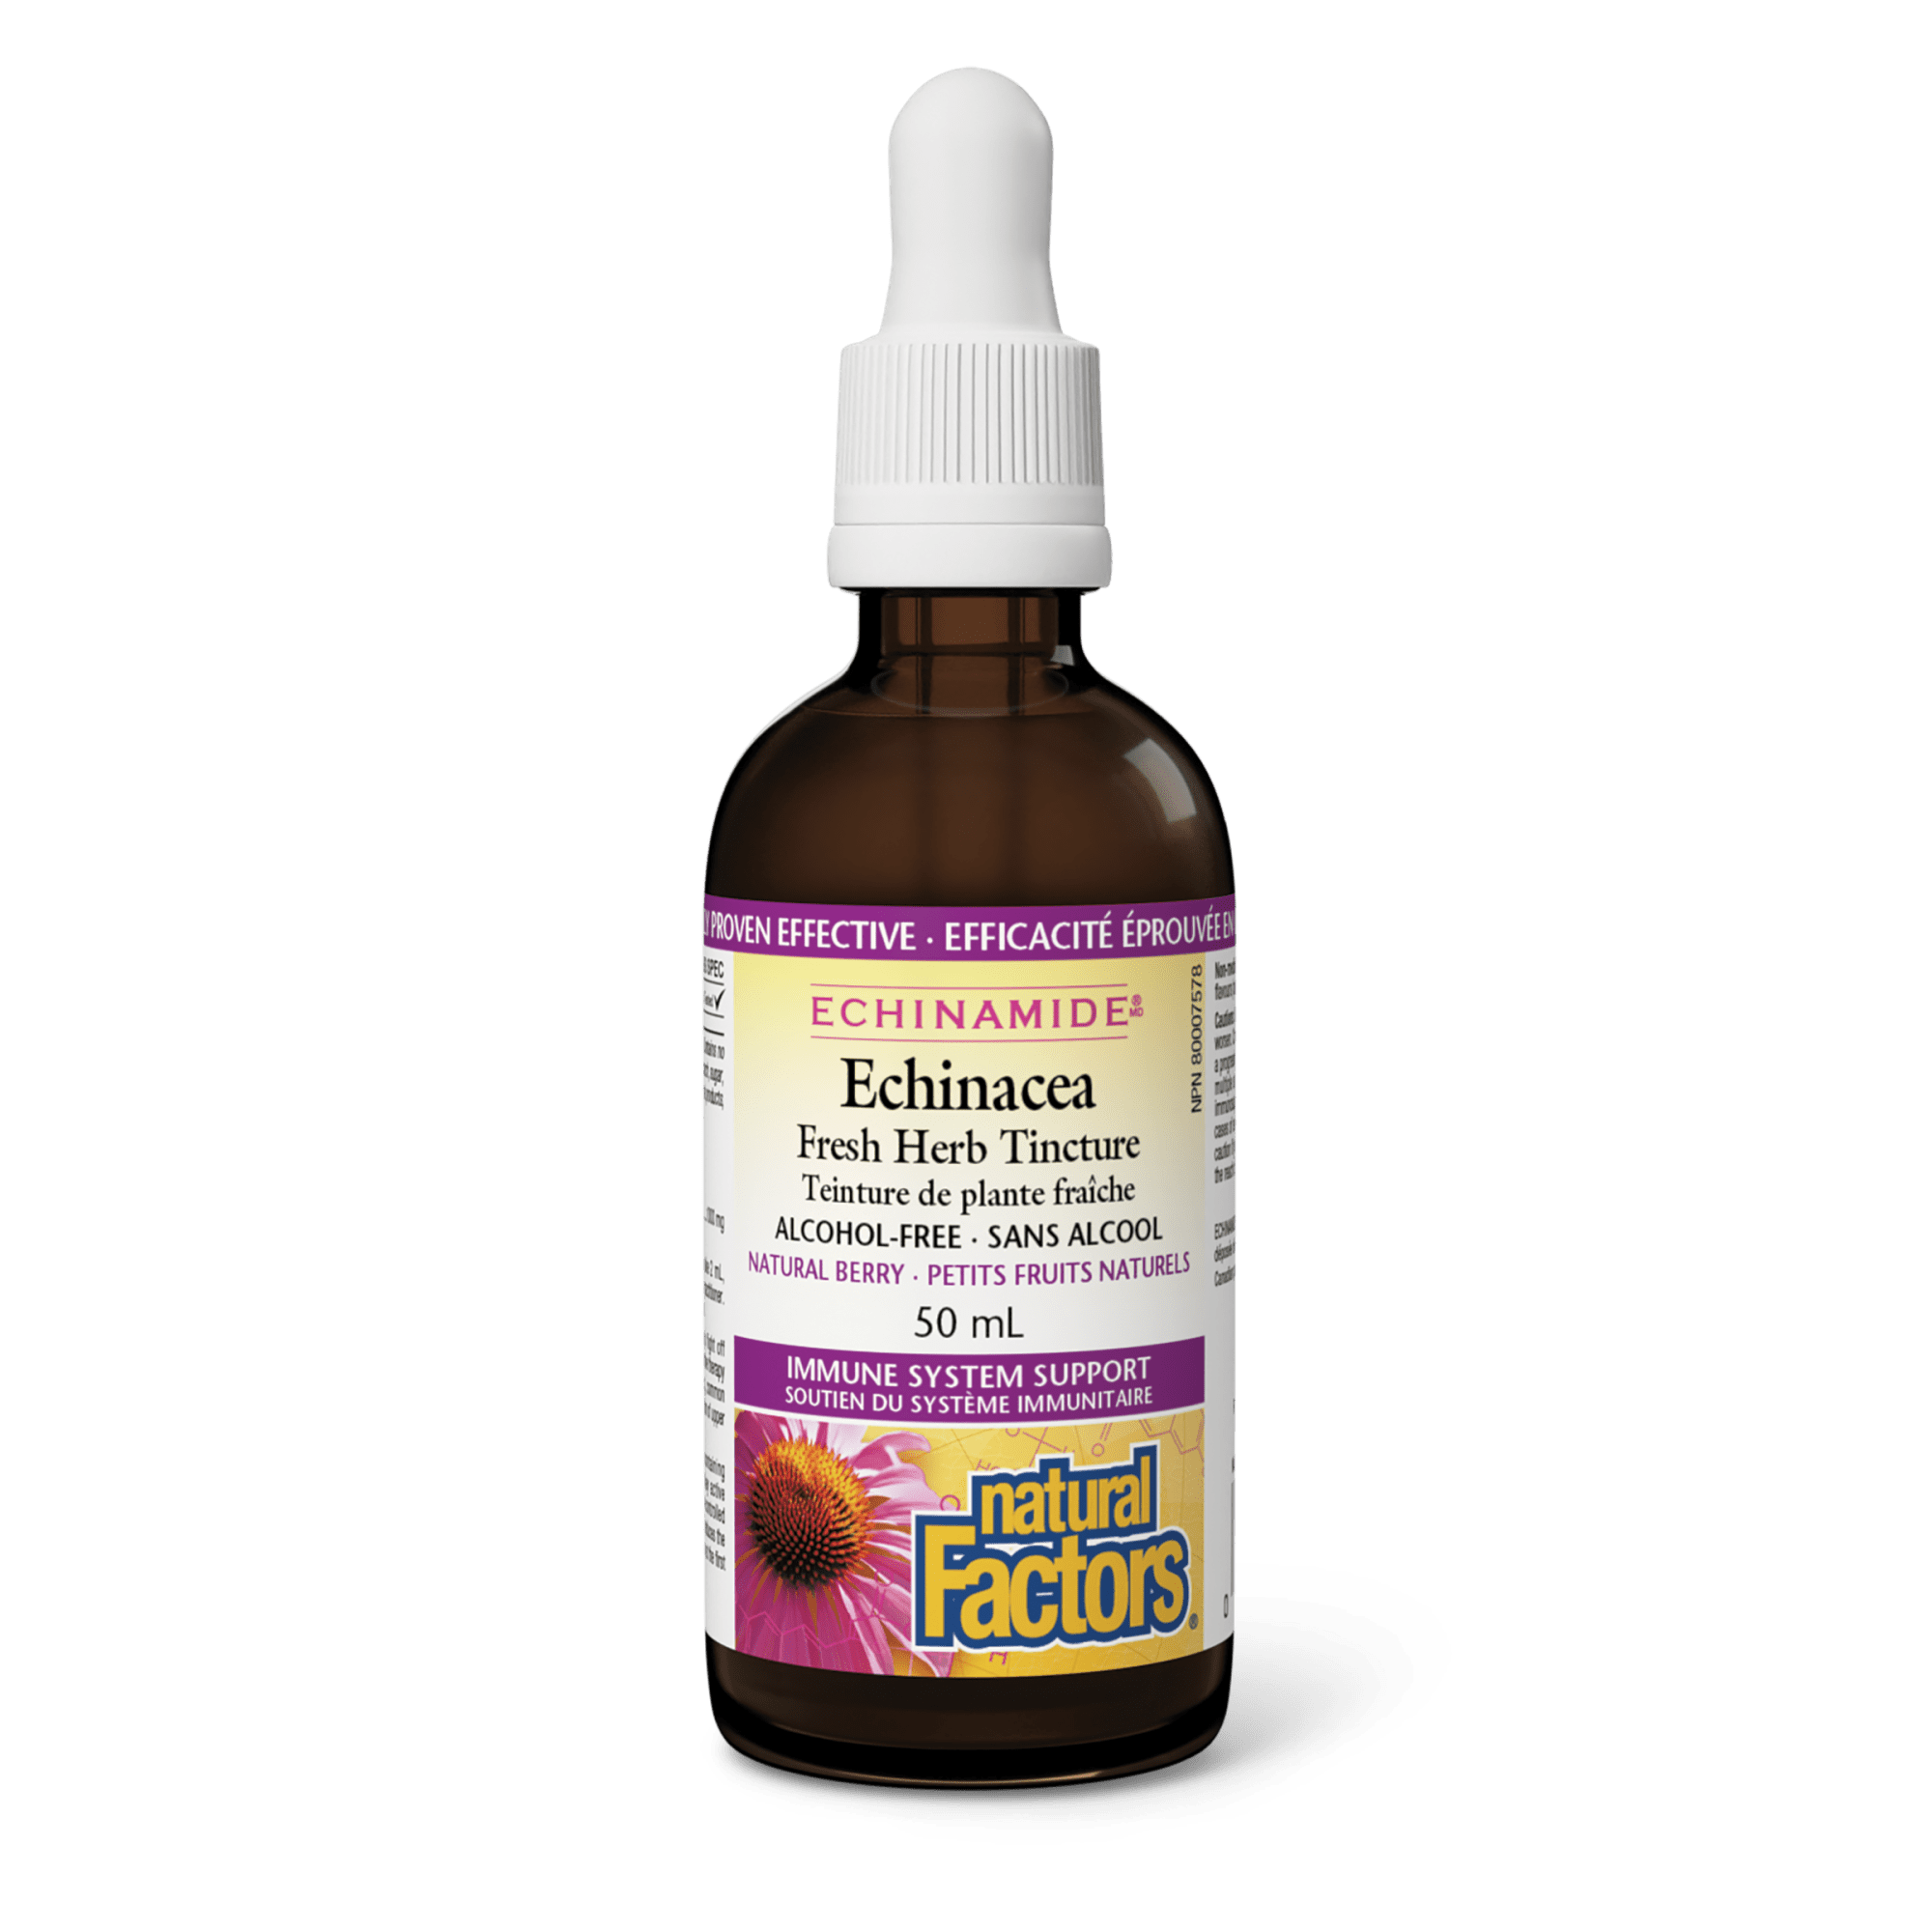 Natural Factors ECHINAMIDE Alcohol-Free Herb Tincture Natural Berry 50ml